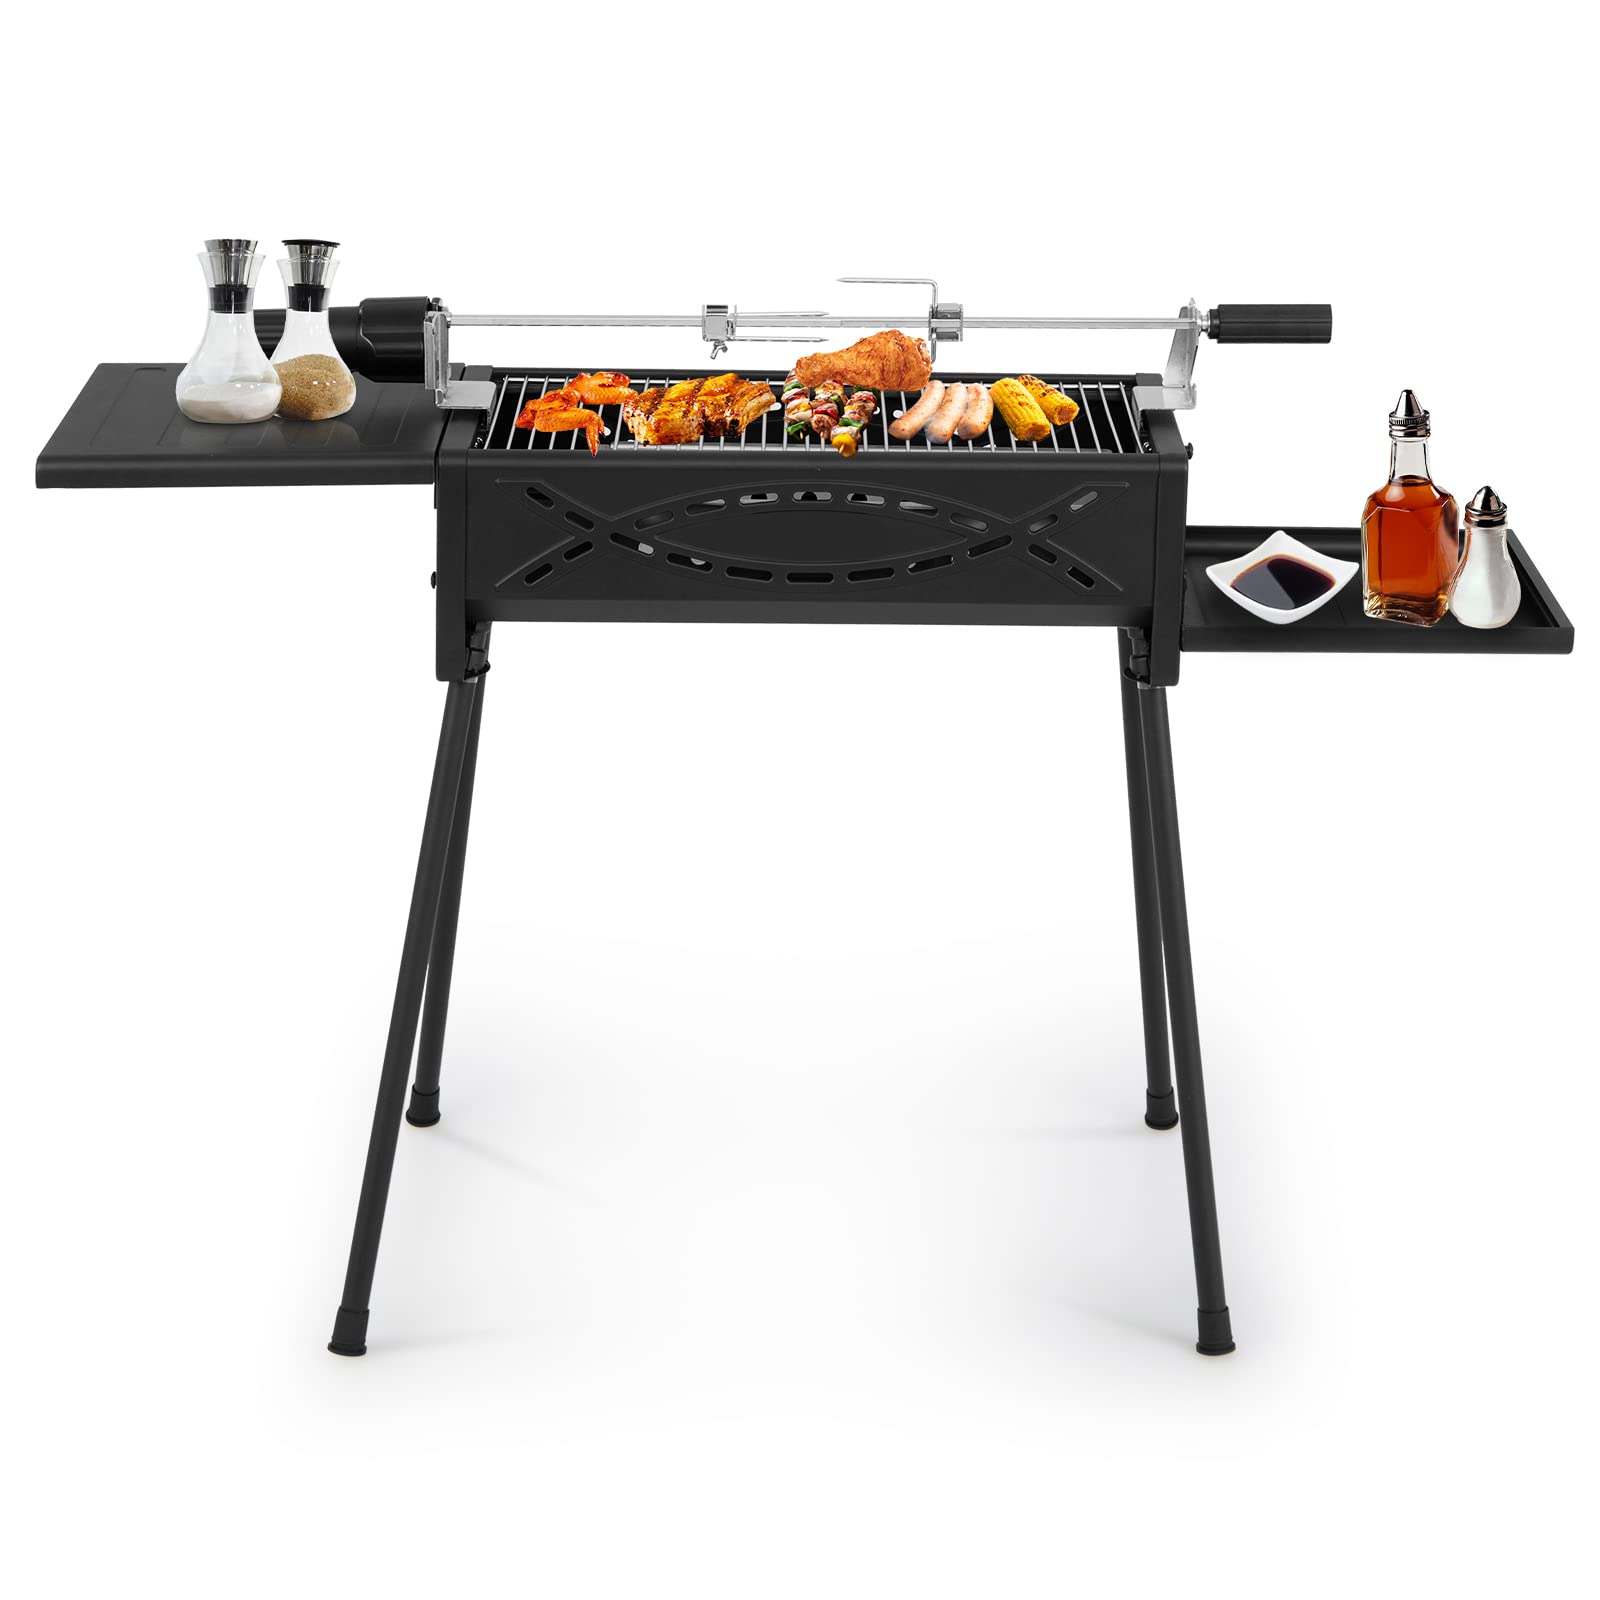 Giantex Charcoal Grill with Automatic Rotisserie Kit, 2 Folding Side Tables